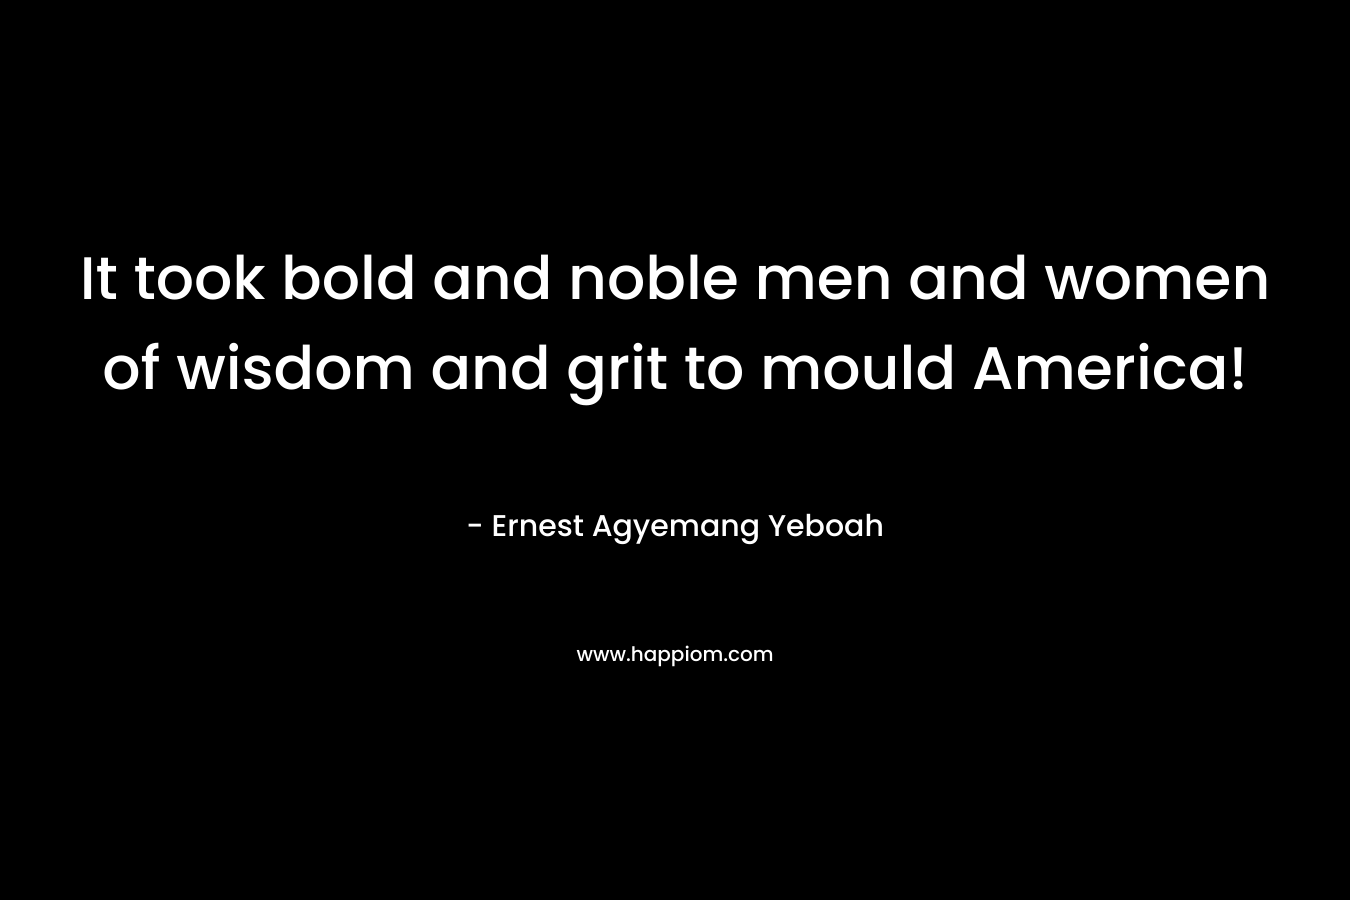 It took bold and noble men and women of wisdom and grit to mould America!